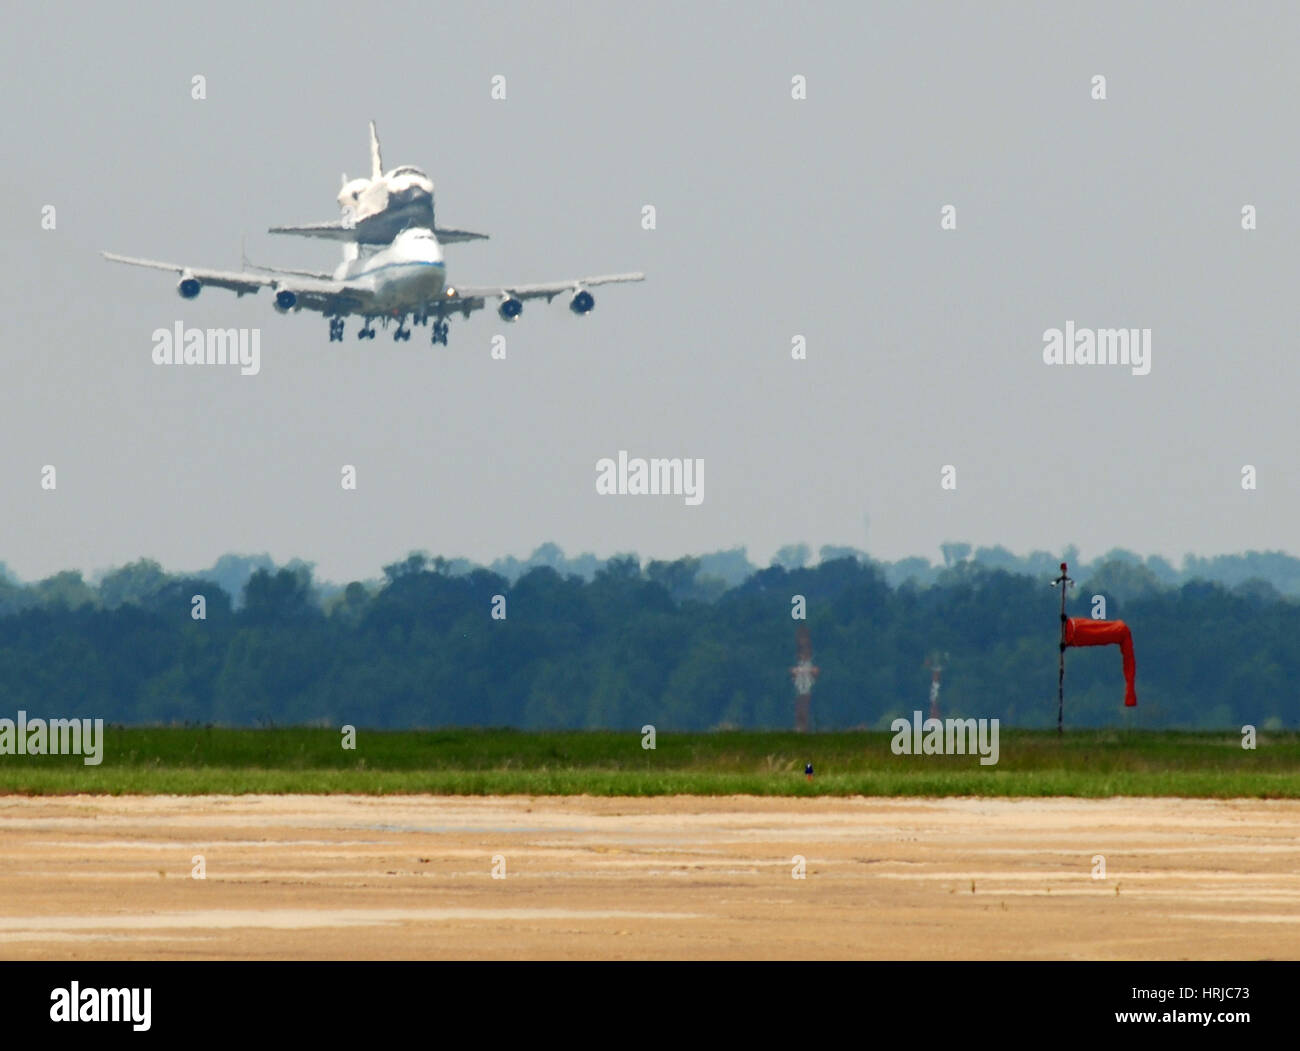 747 Carrying Space Shuttle Stock Photo